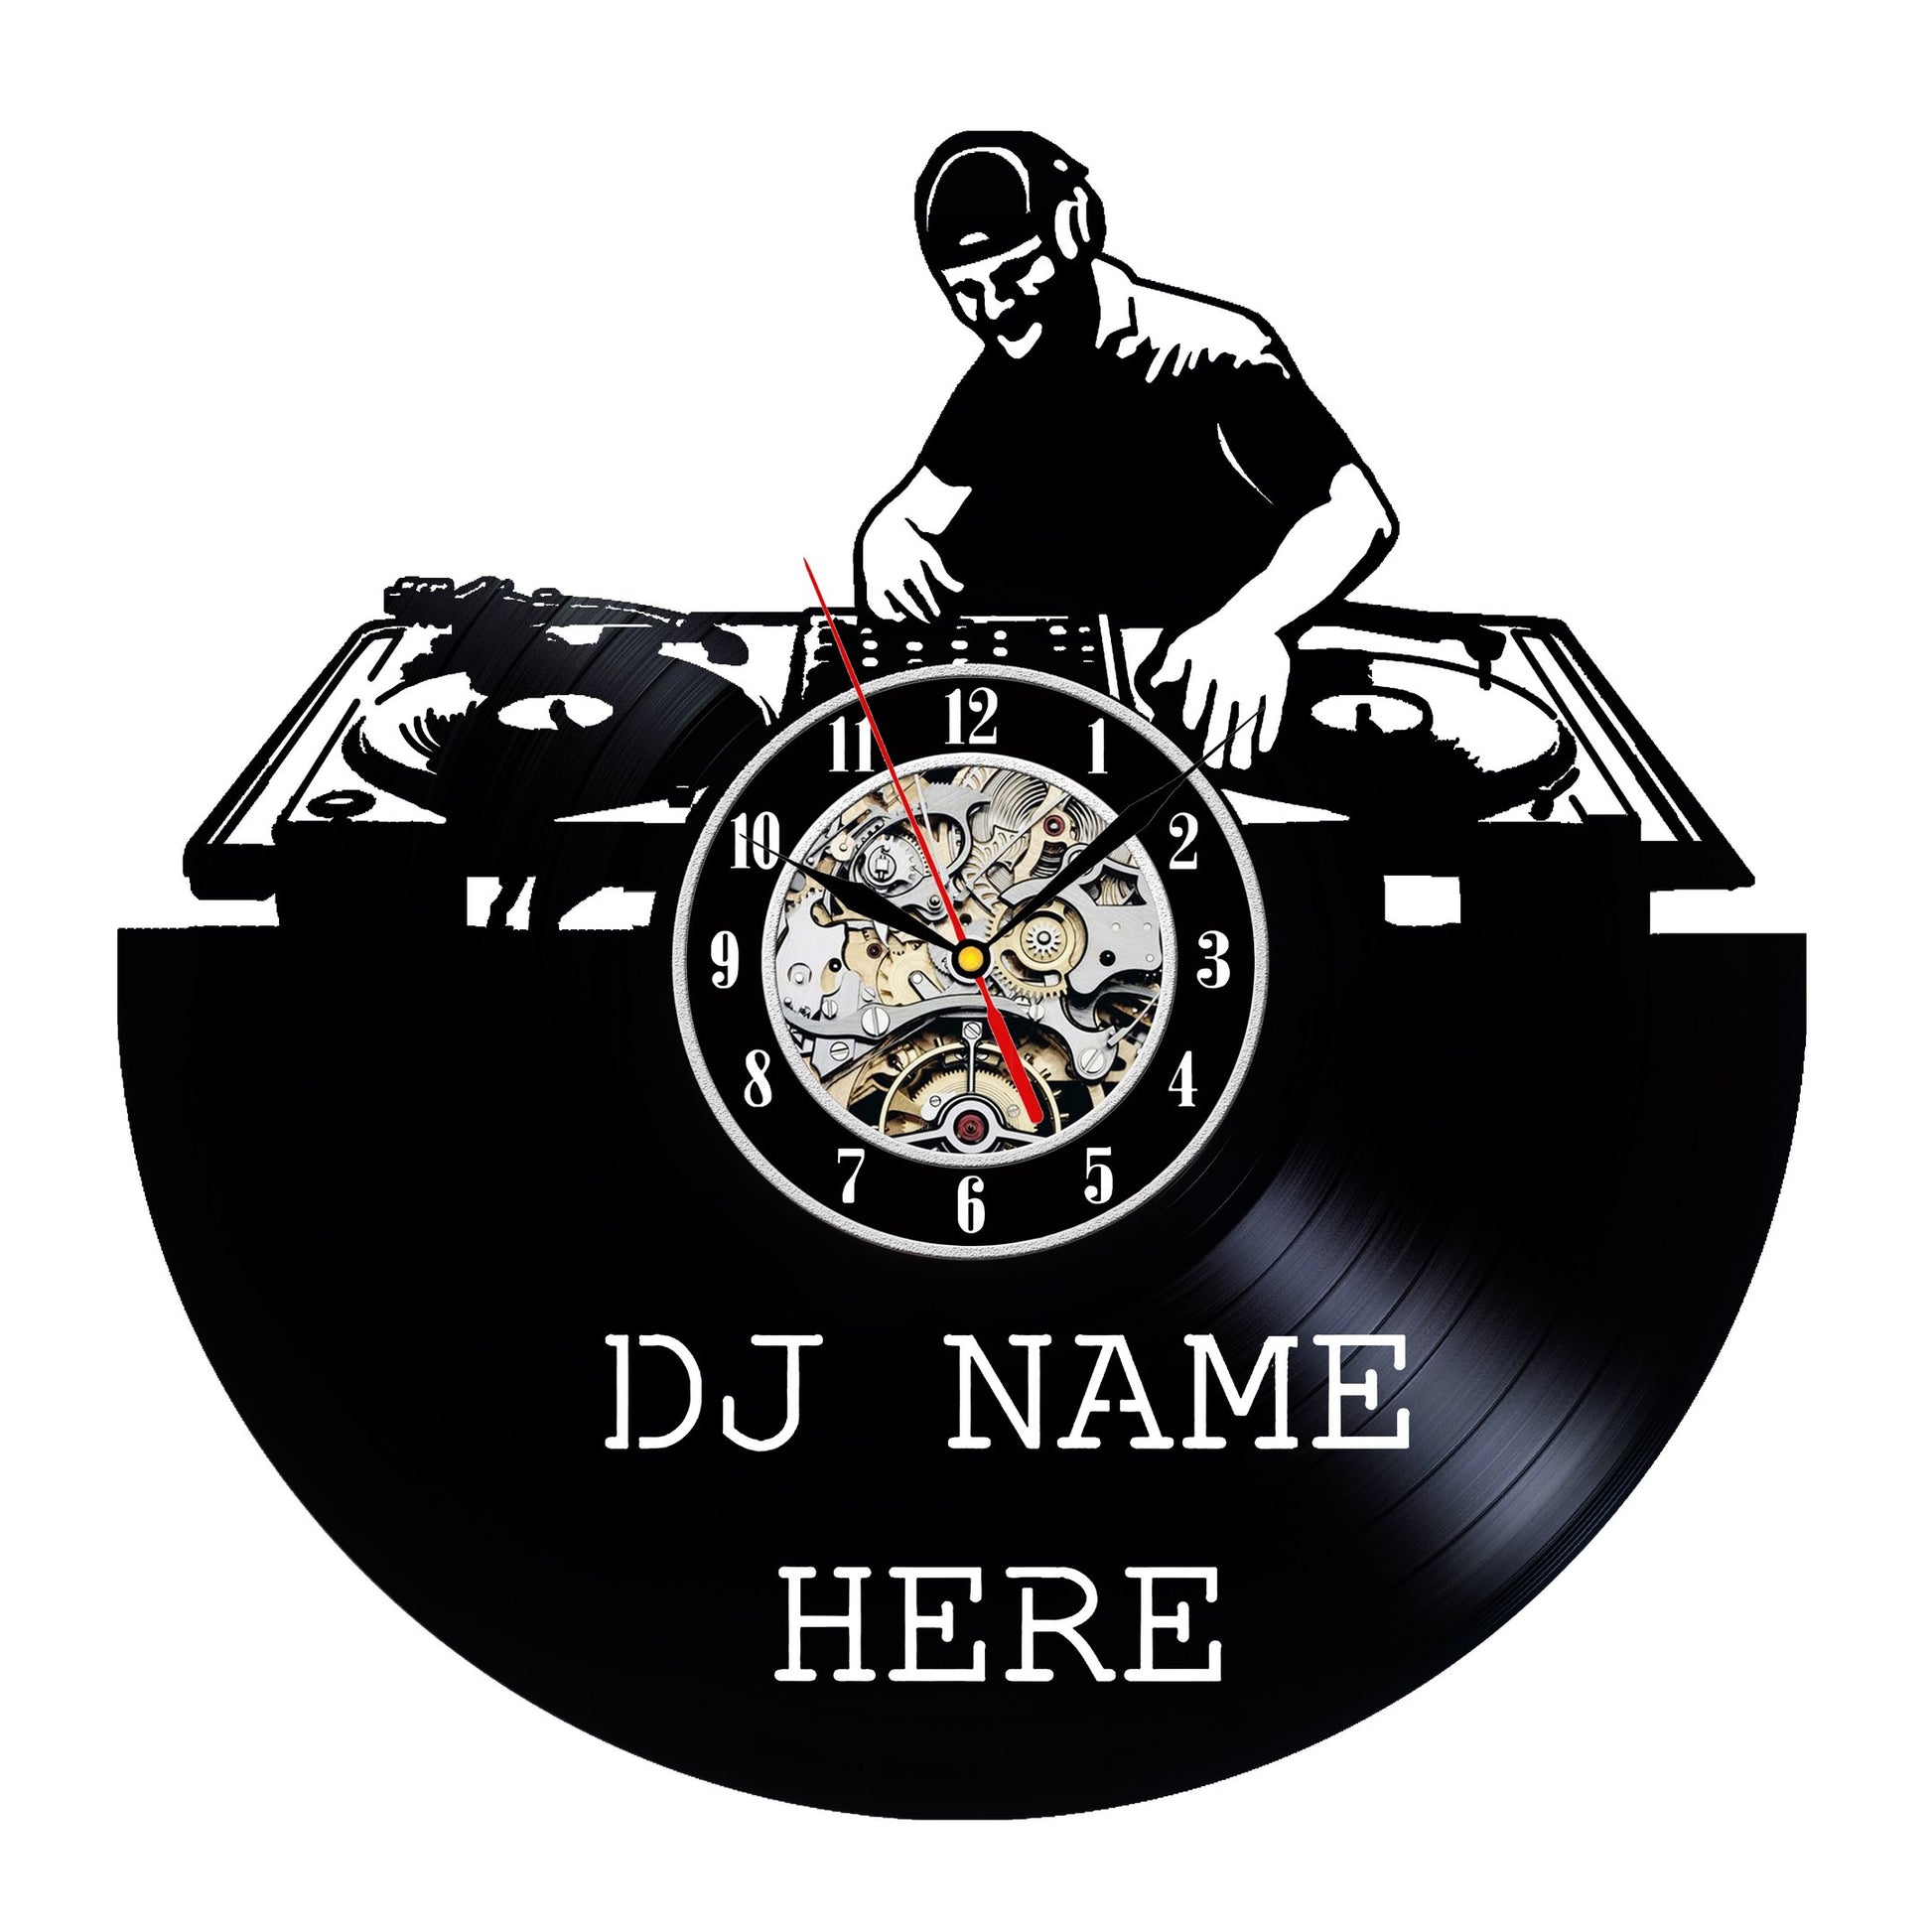 Personalized Clock Gift for a Dj Friend Gullei.com